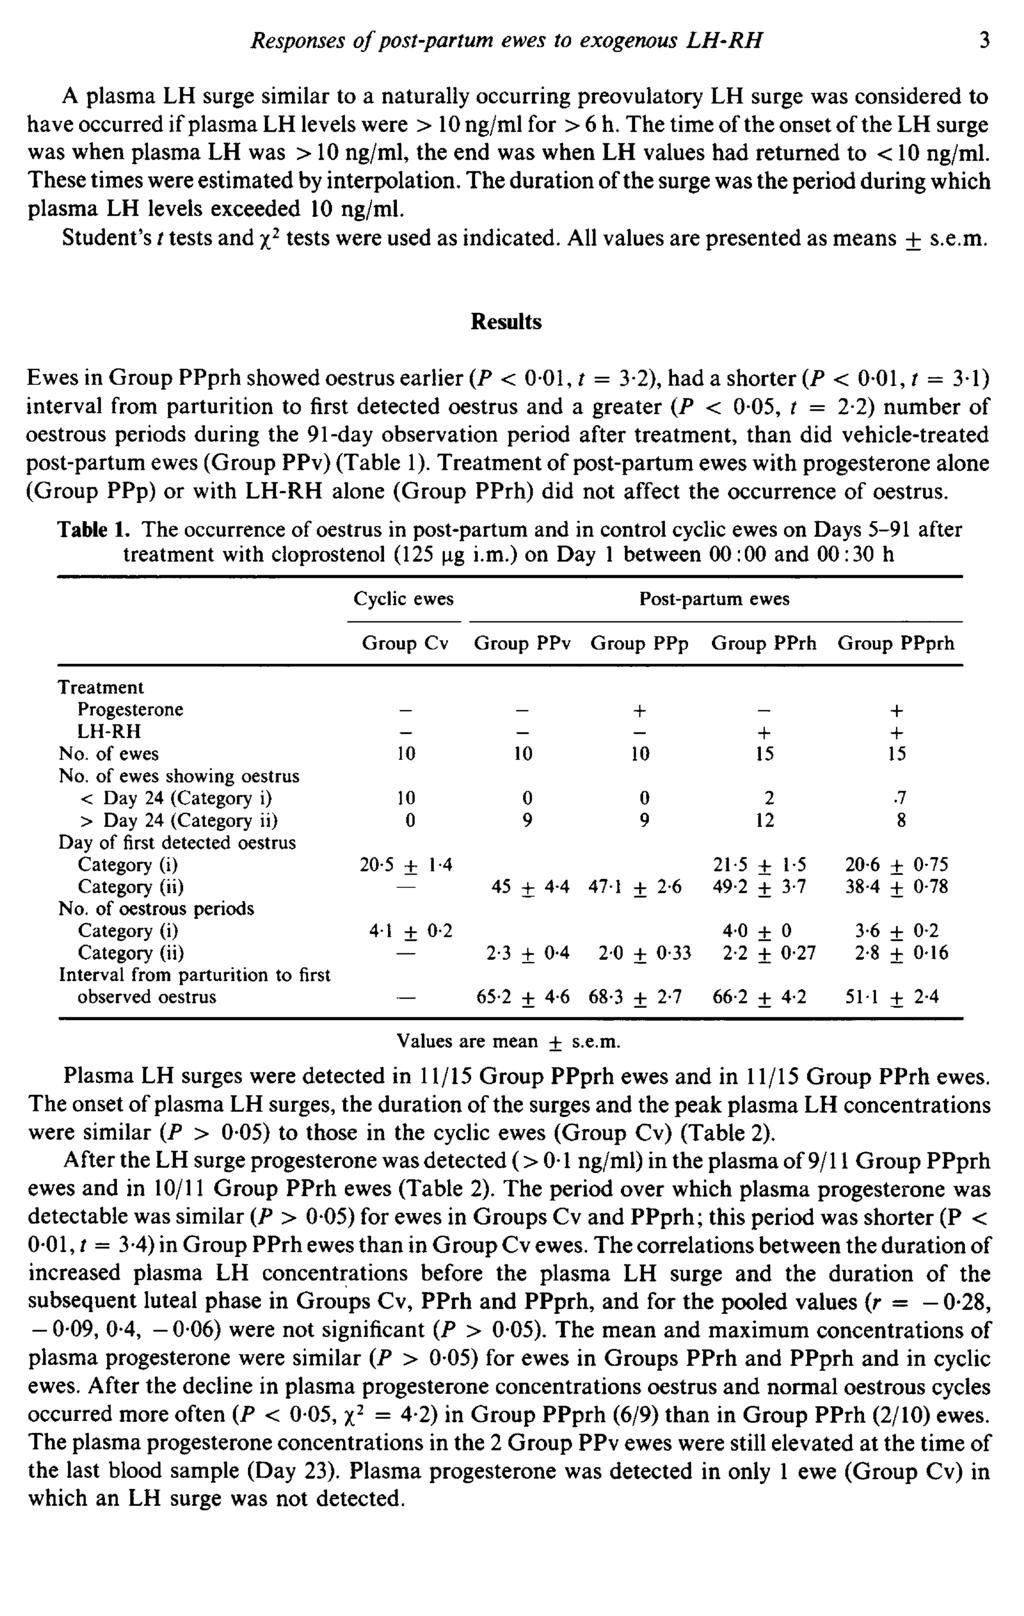 6) - A plasma LH surge similar to a naturally occurring preovulatory LH surge was considered to have occurred if plasma LH levels were > ng/ml for > 6 h.